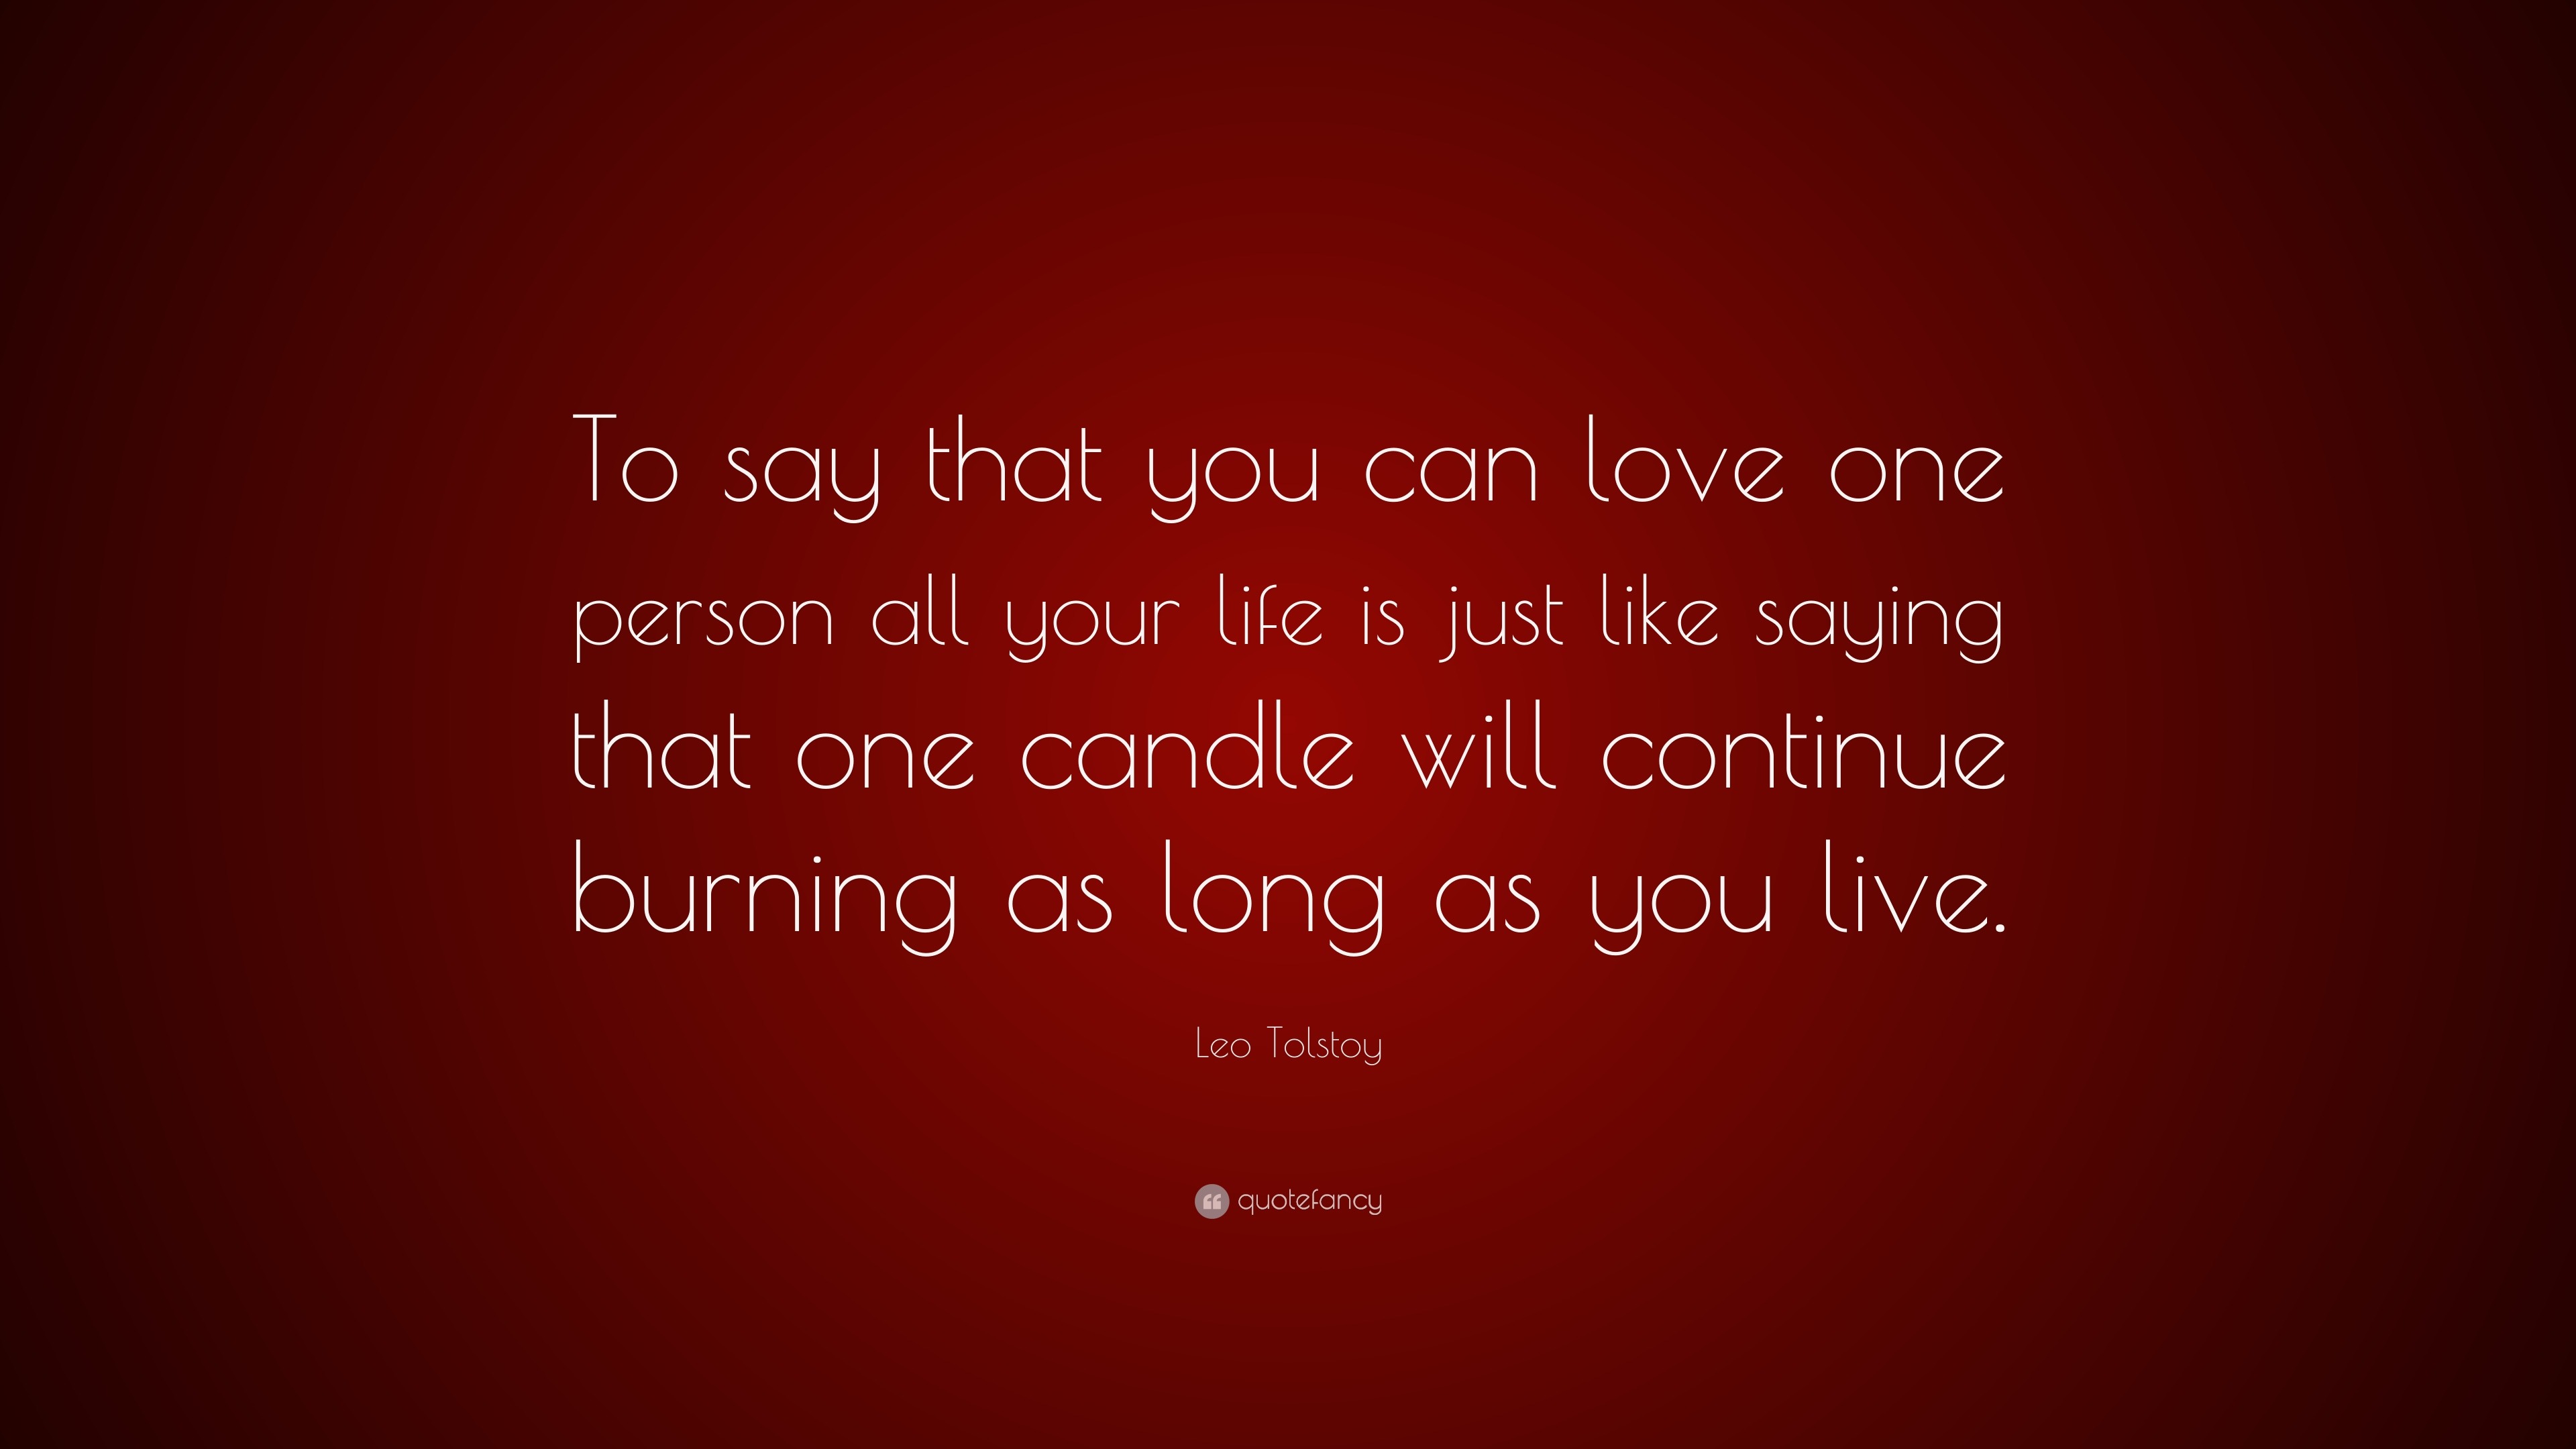 Leo Tolstoy Quote “To say that you can love one person all your life